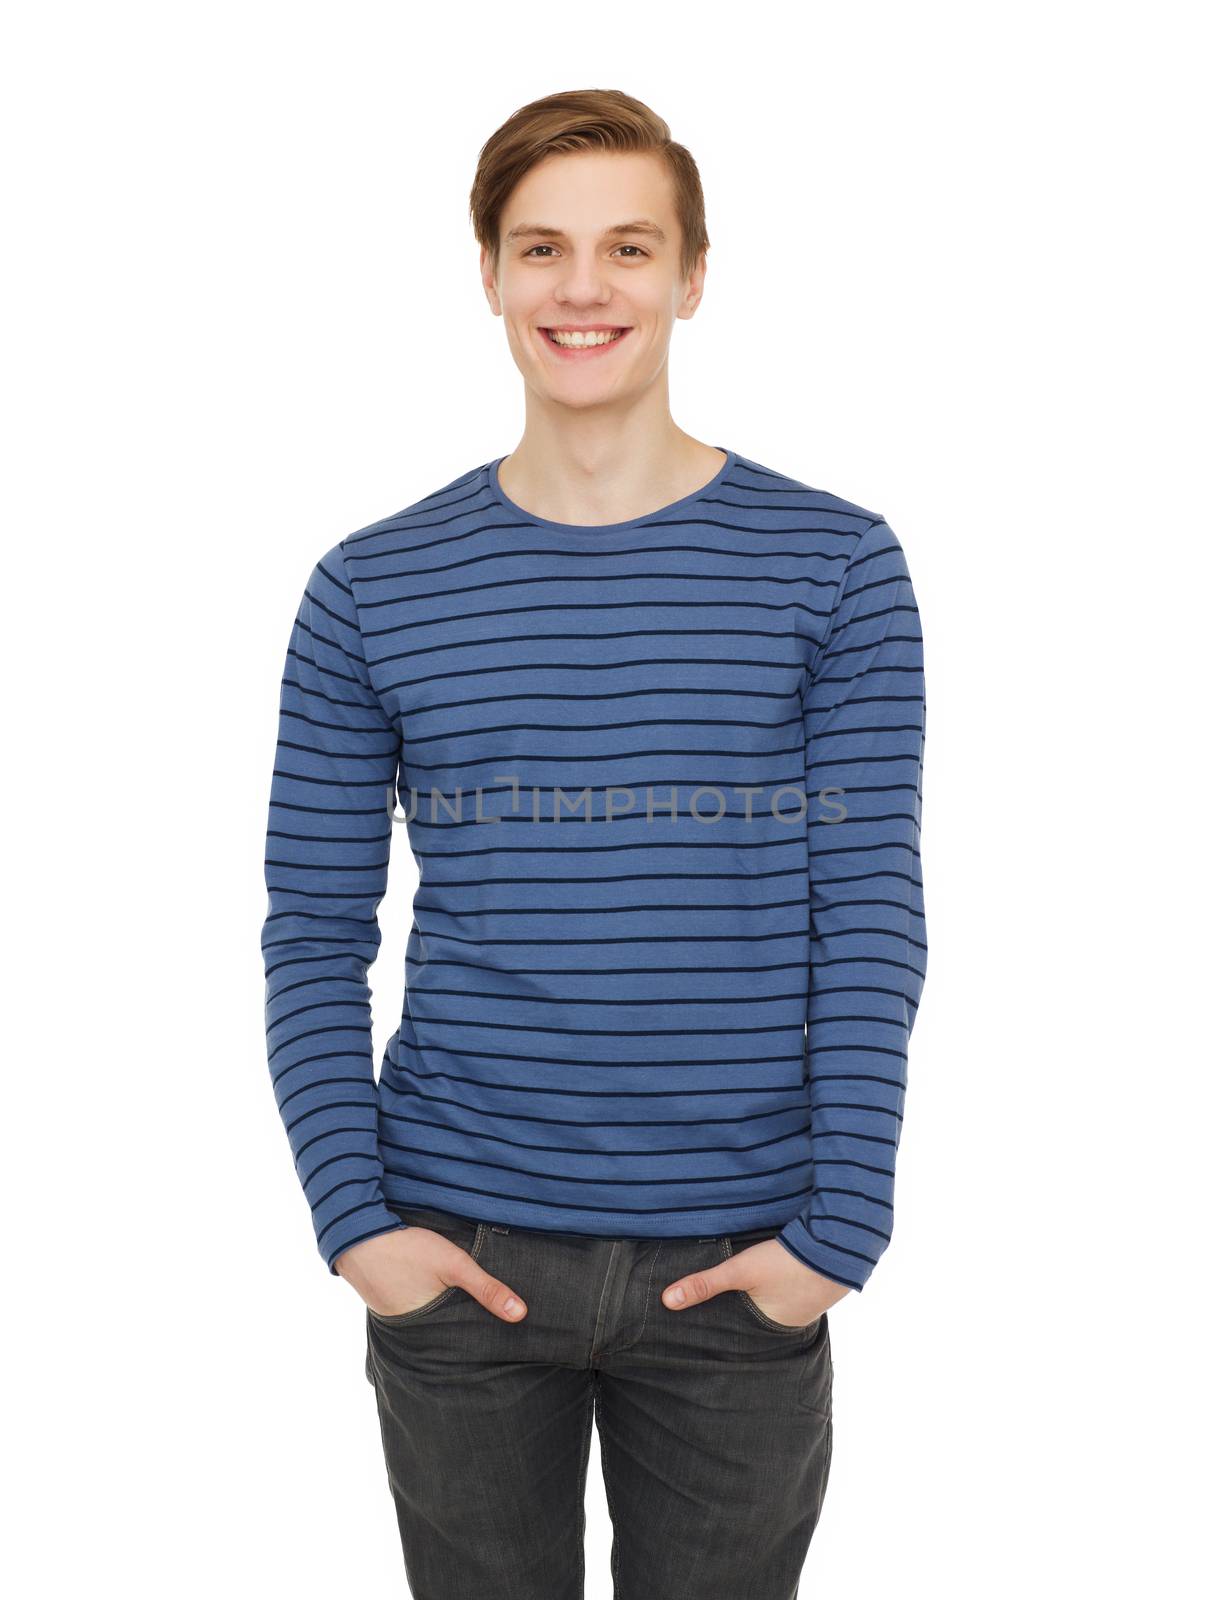 people and happiness concept - smiling teenage boy over white background